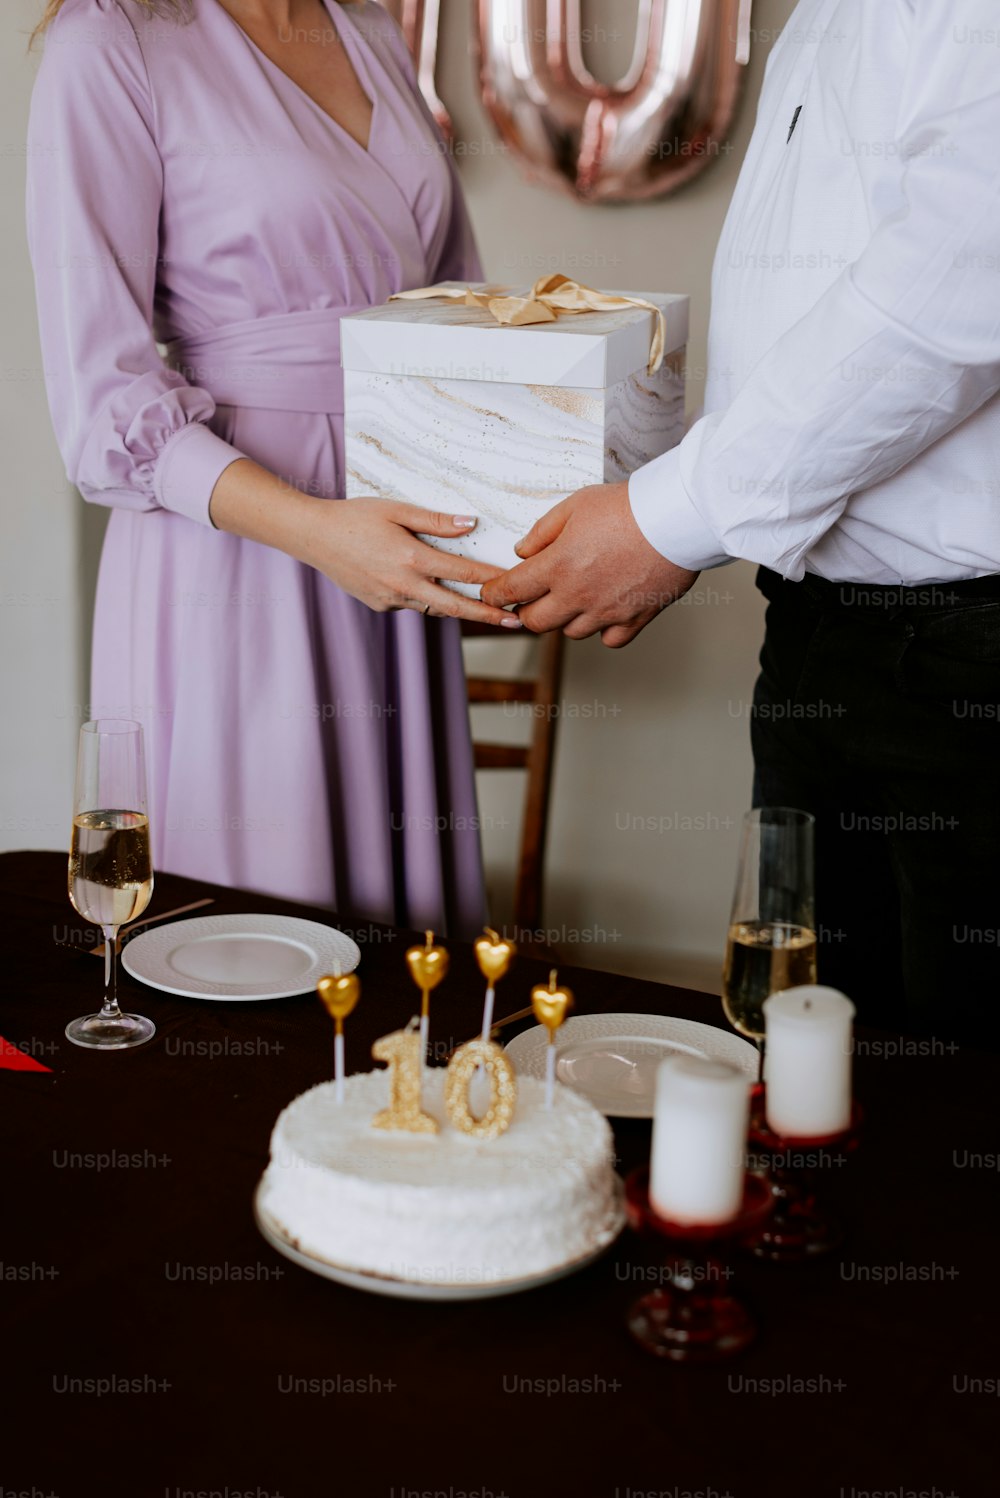 a man and a woman holding a box with a cake on it